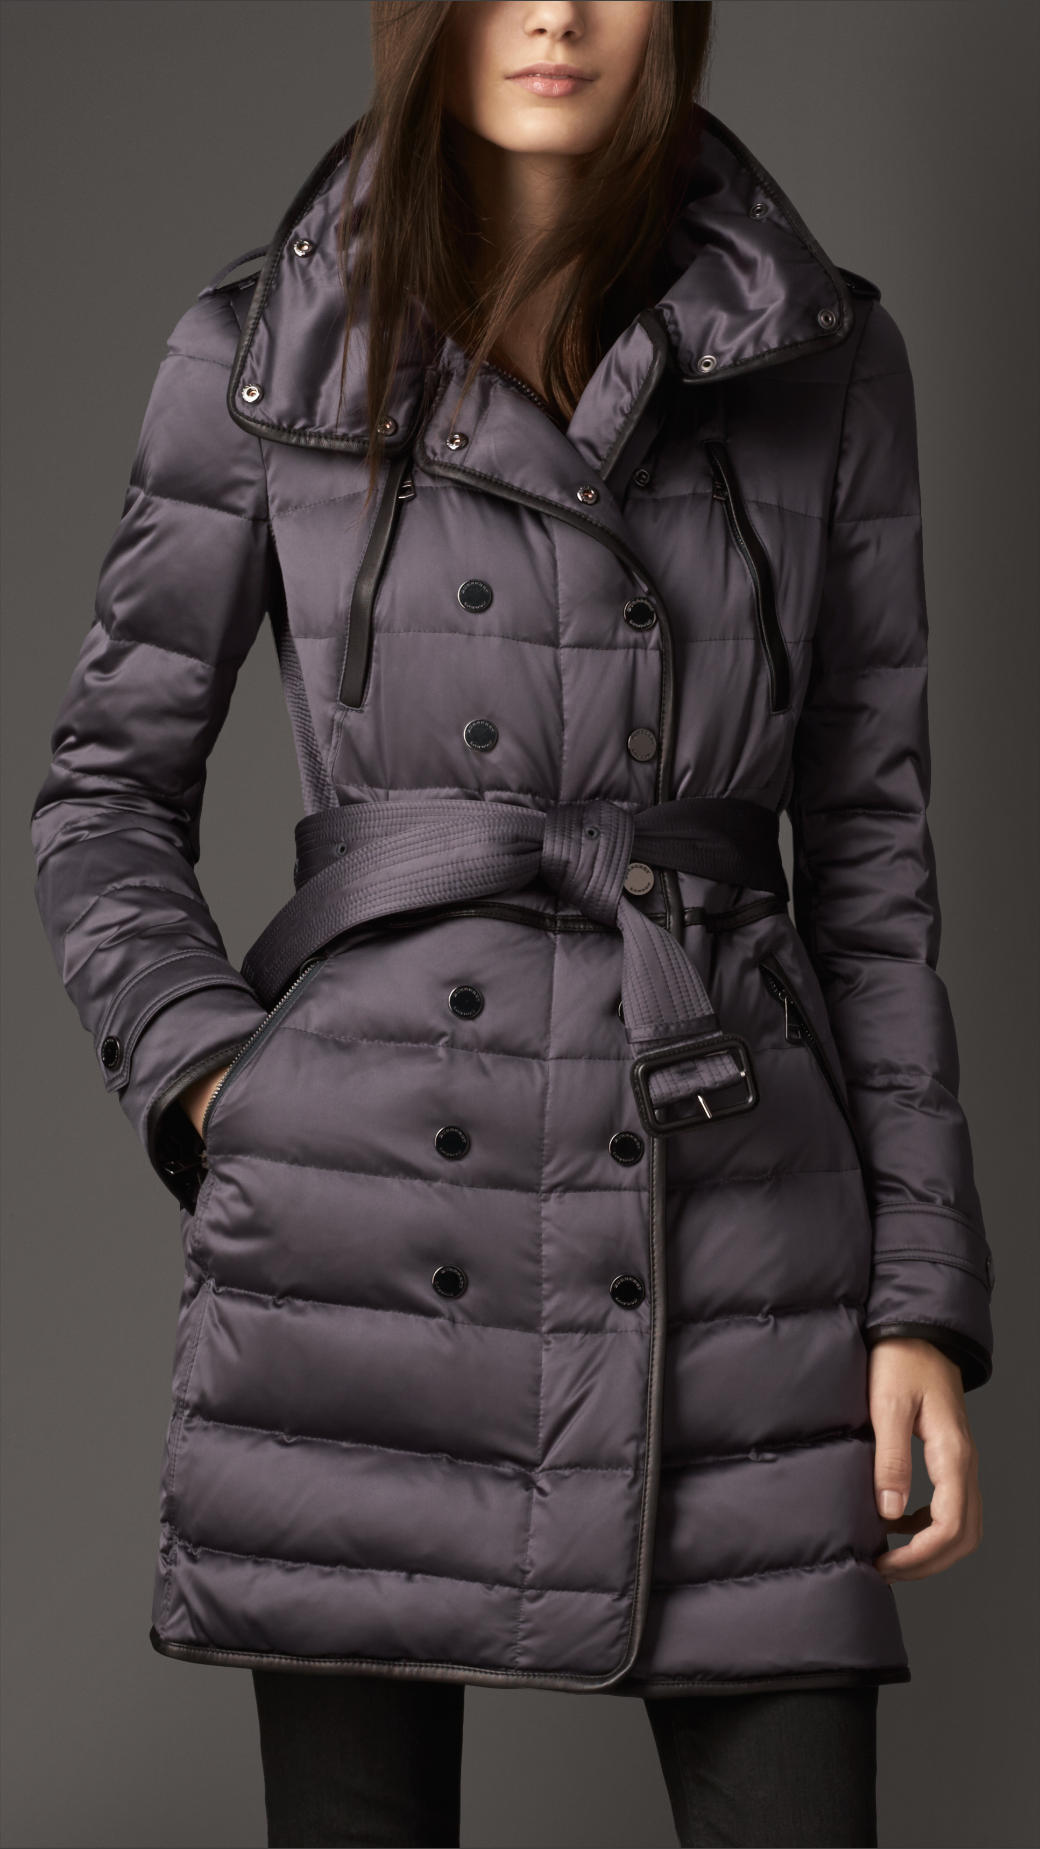 burberry puffer sale Online Shopping for Women, Men, Kids Fashion &  Lifestyle|Free Delivery & Returns! -